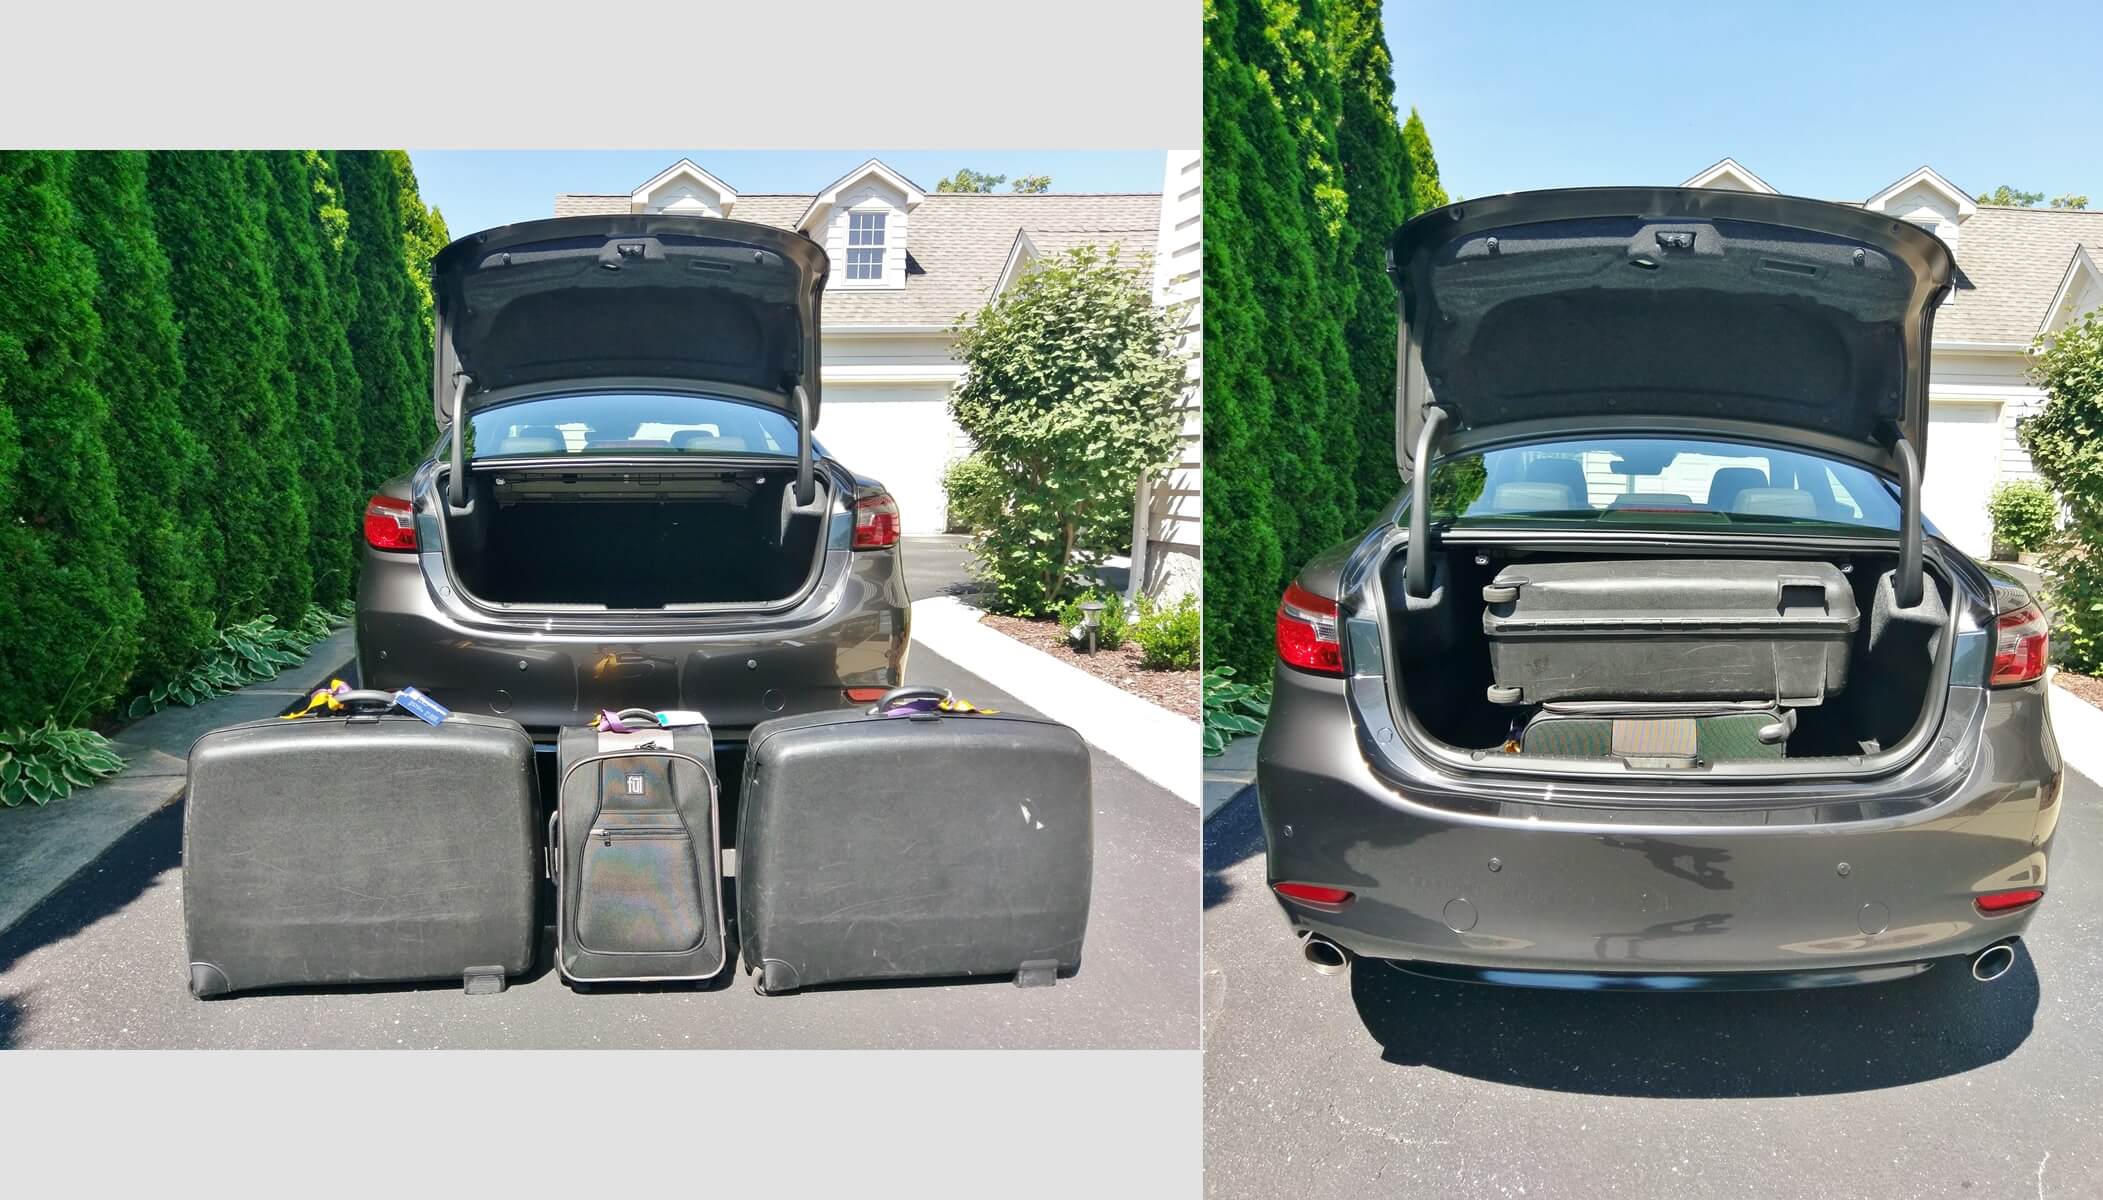 2018 Mazda6 Signature 2.5T: Got 2 full size hardside suitcases and 1 soft-side carry on?